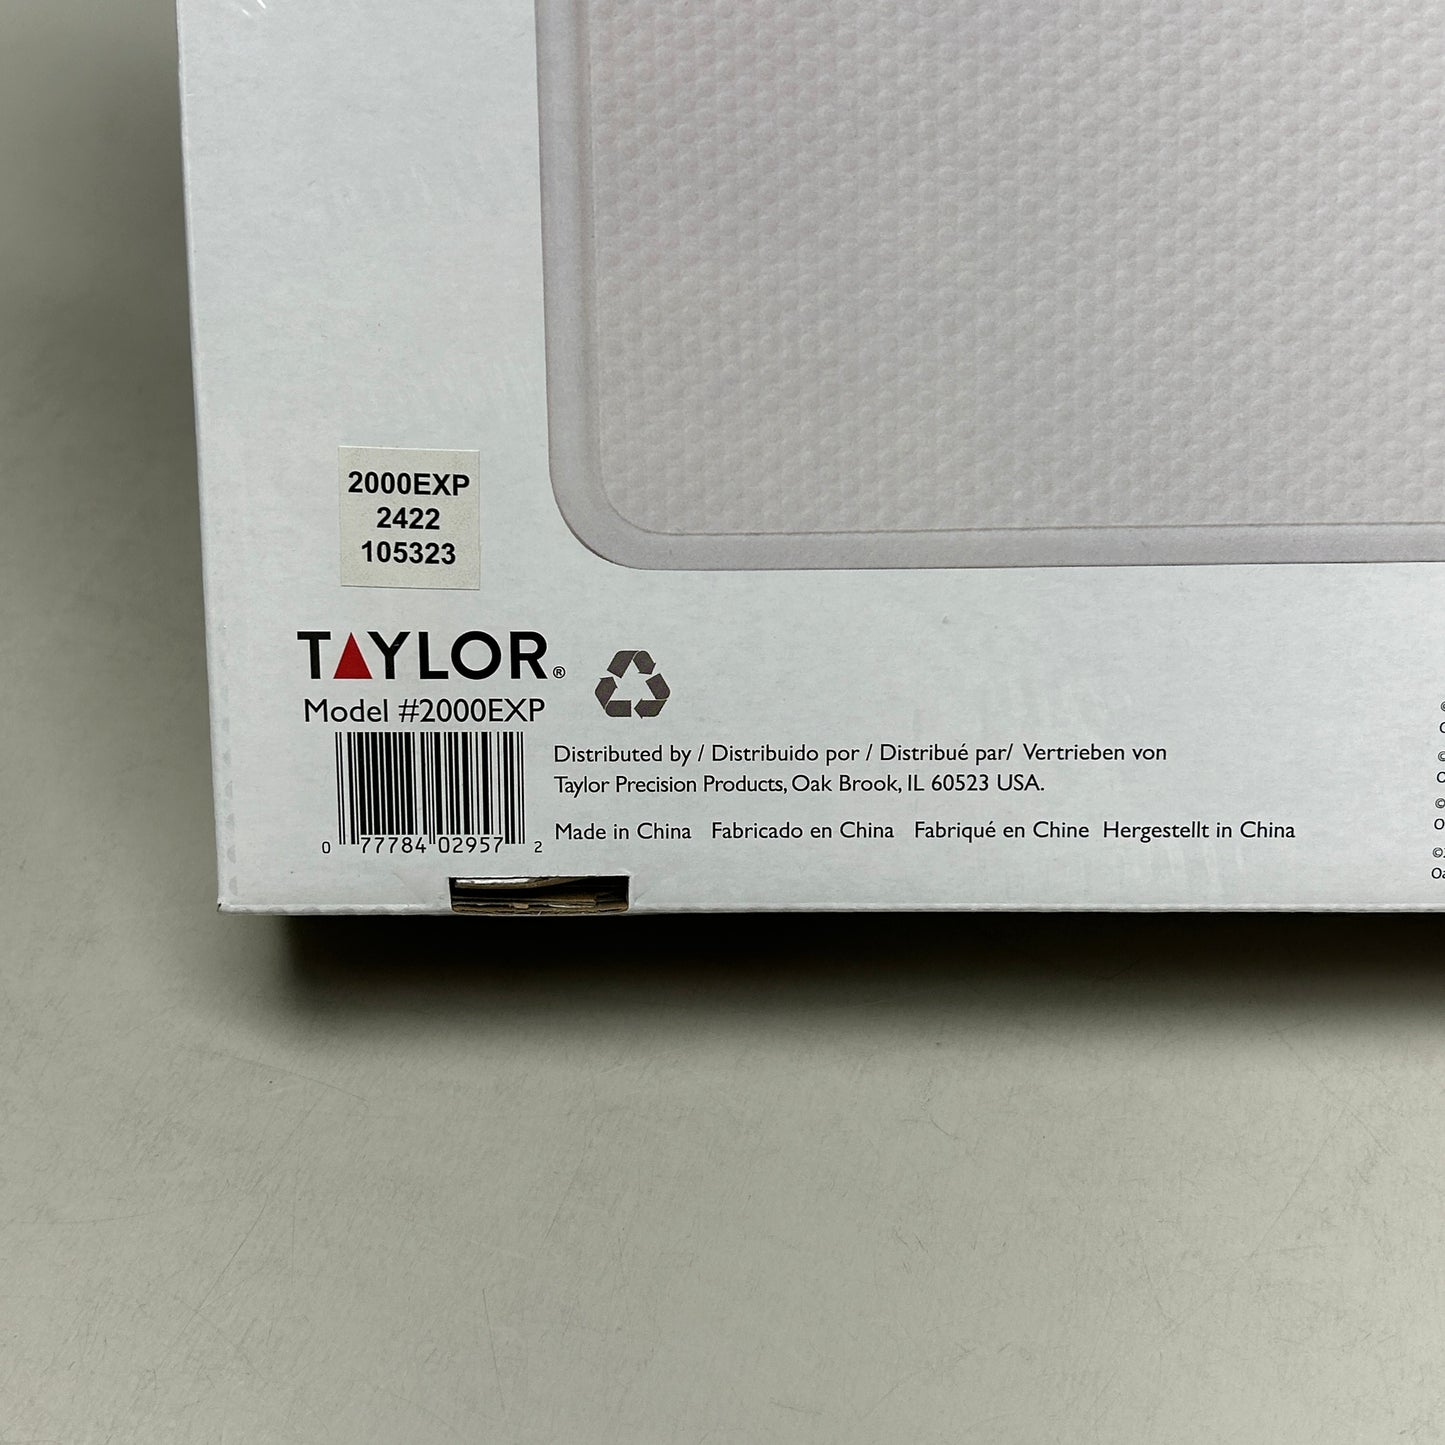 TAYLOR Mechanical Rotating Dial Bath Scale, White 20004014EXP (New)